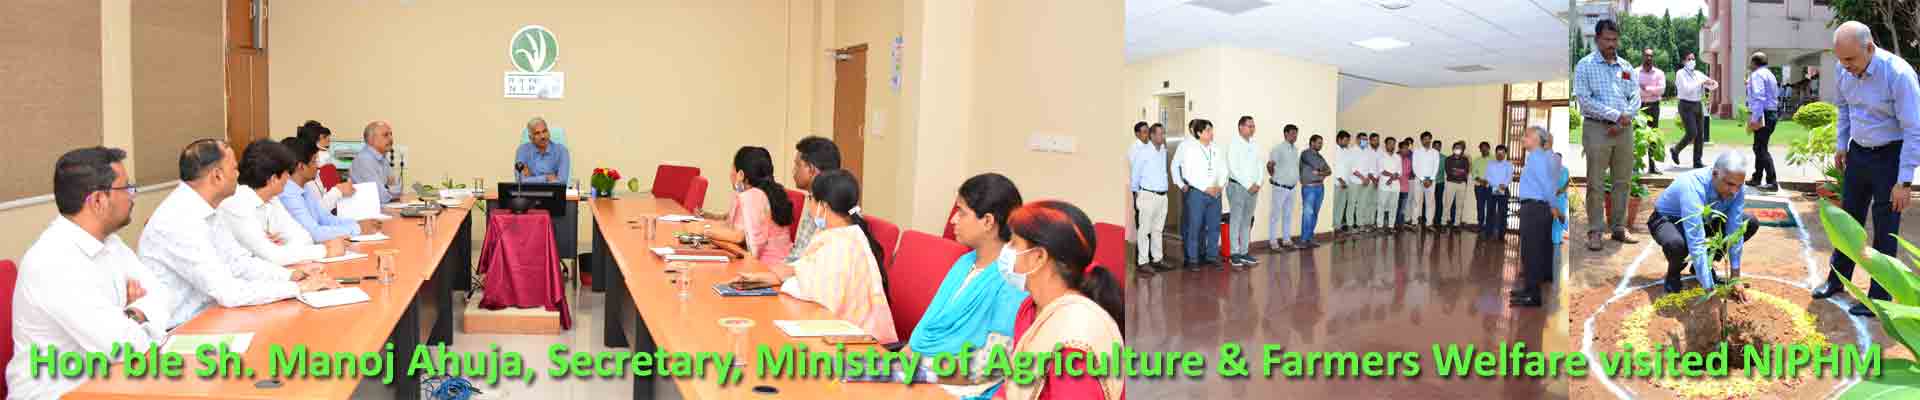 Sh. Manoj Ahuja, Secretary, Ministry of Agriculture & Farmers Welfare, Government of India visited NIPHM